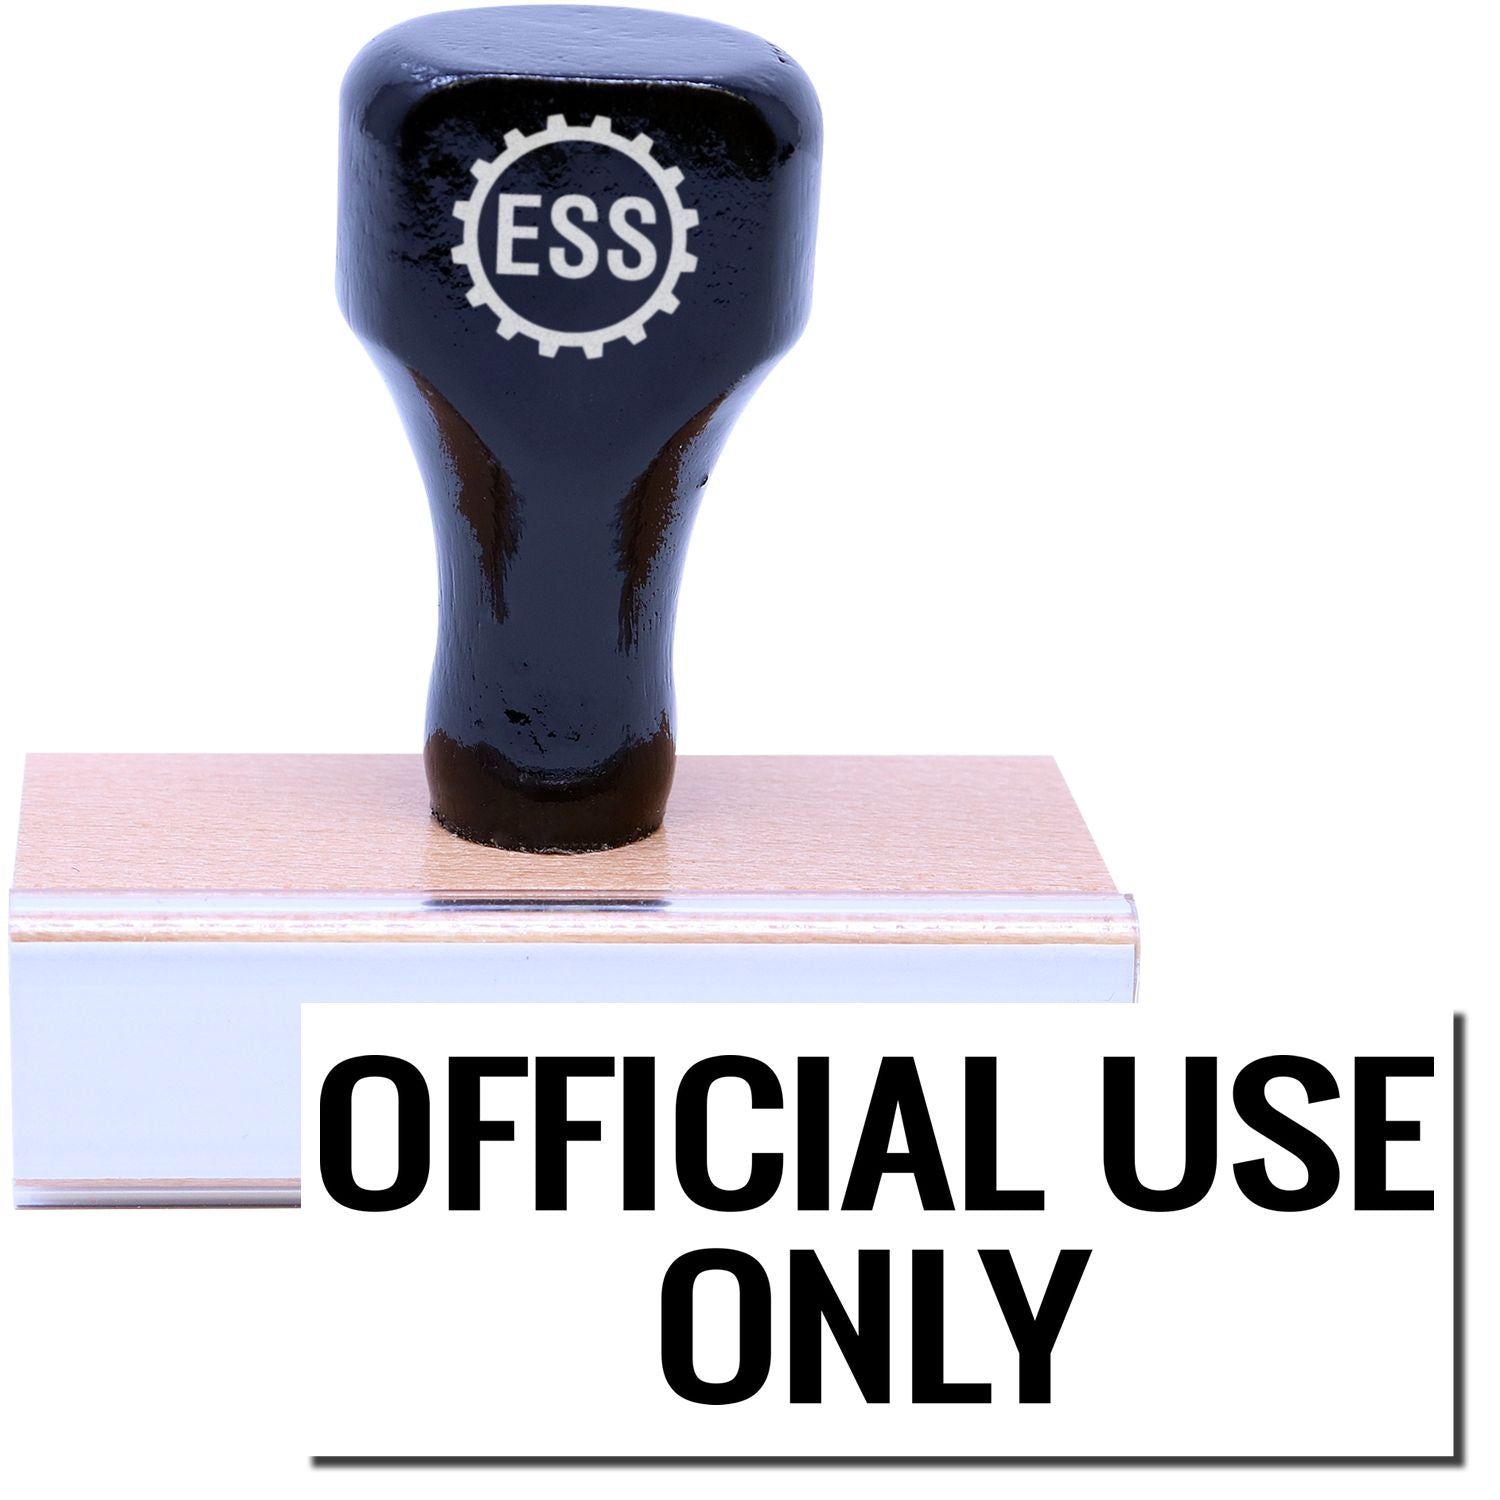 A stock office rubber stamp with a stamped image showing how the text "OFFICIAL USE ONLY" is displayed after stamping.